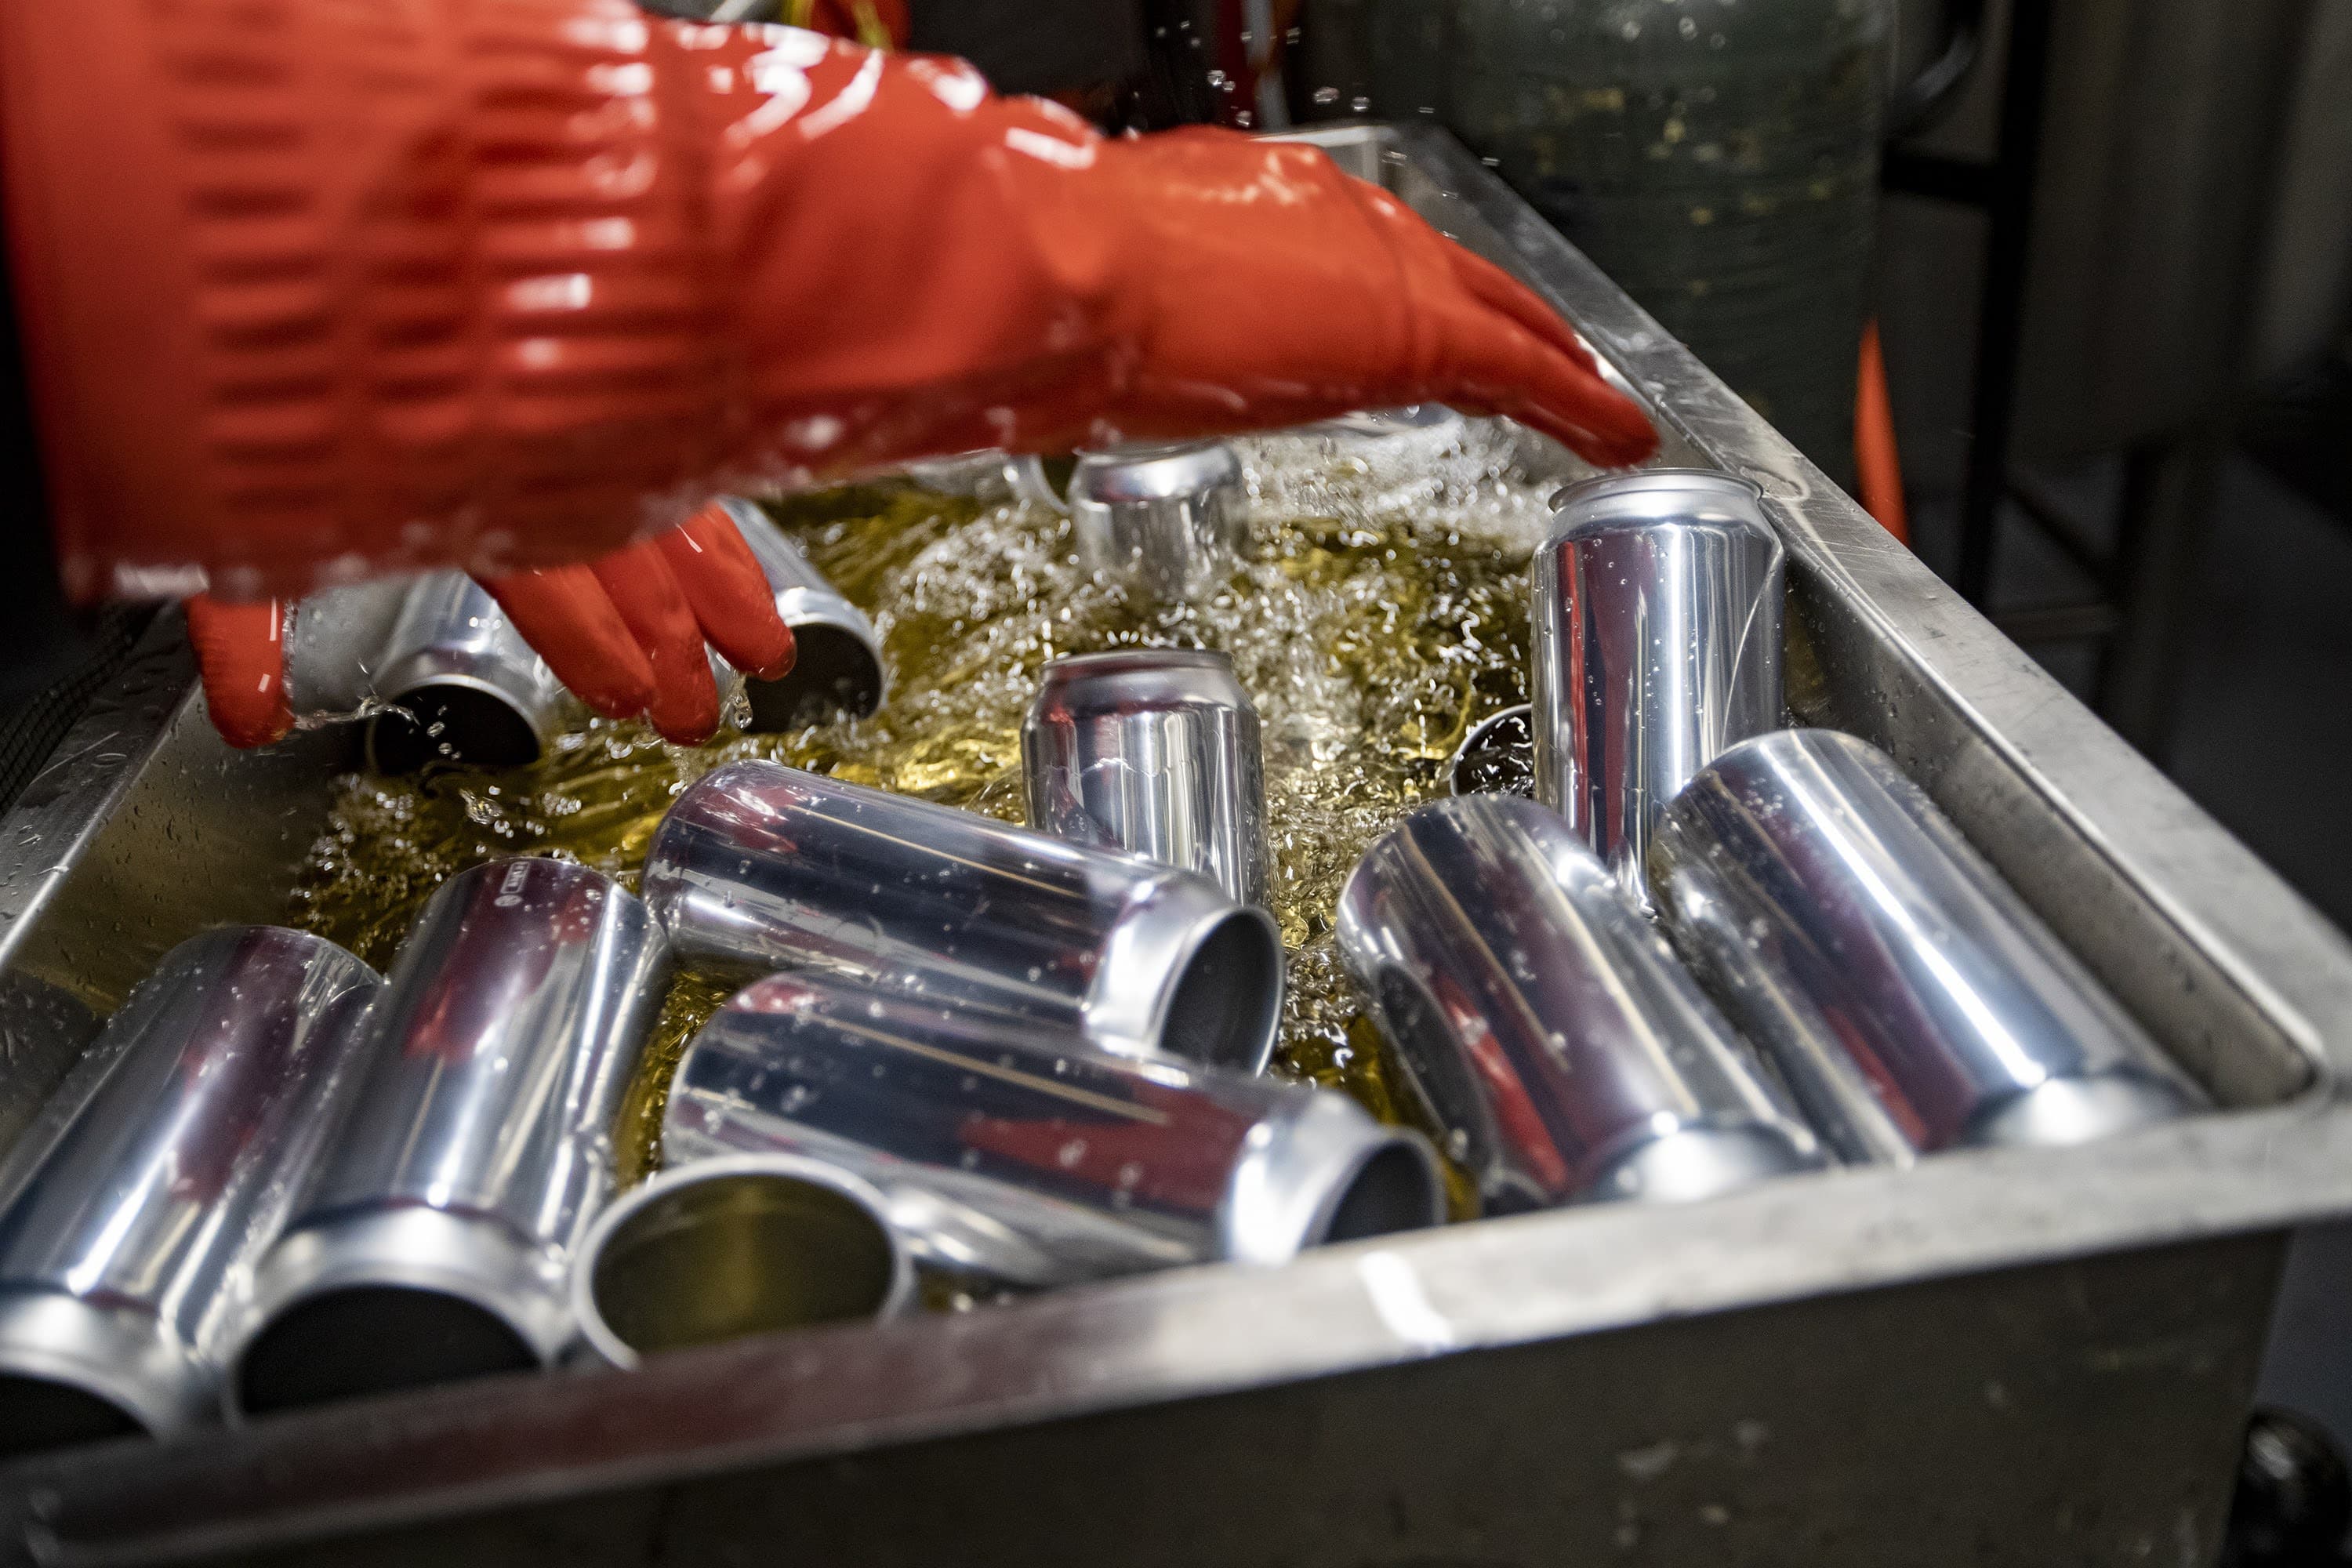 Joel Macleod submerges a case of empty cans into sanitizing solution before filling them with beer at Brato. (Jesse Costa/WBUR)